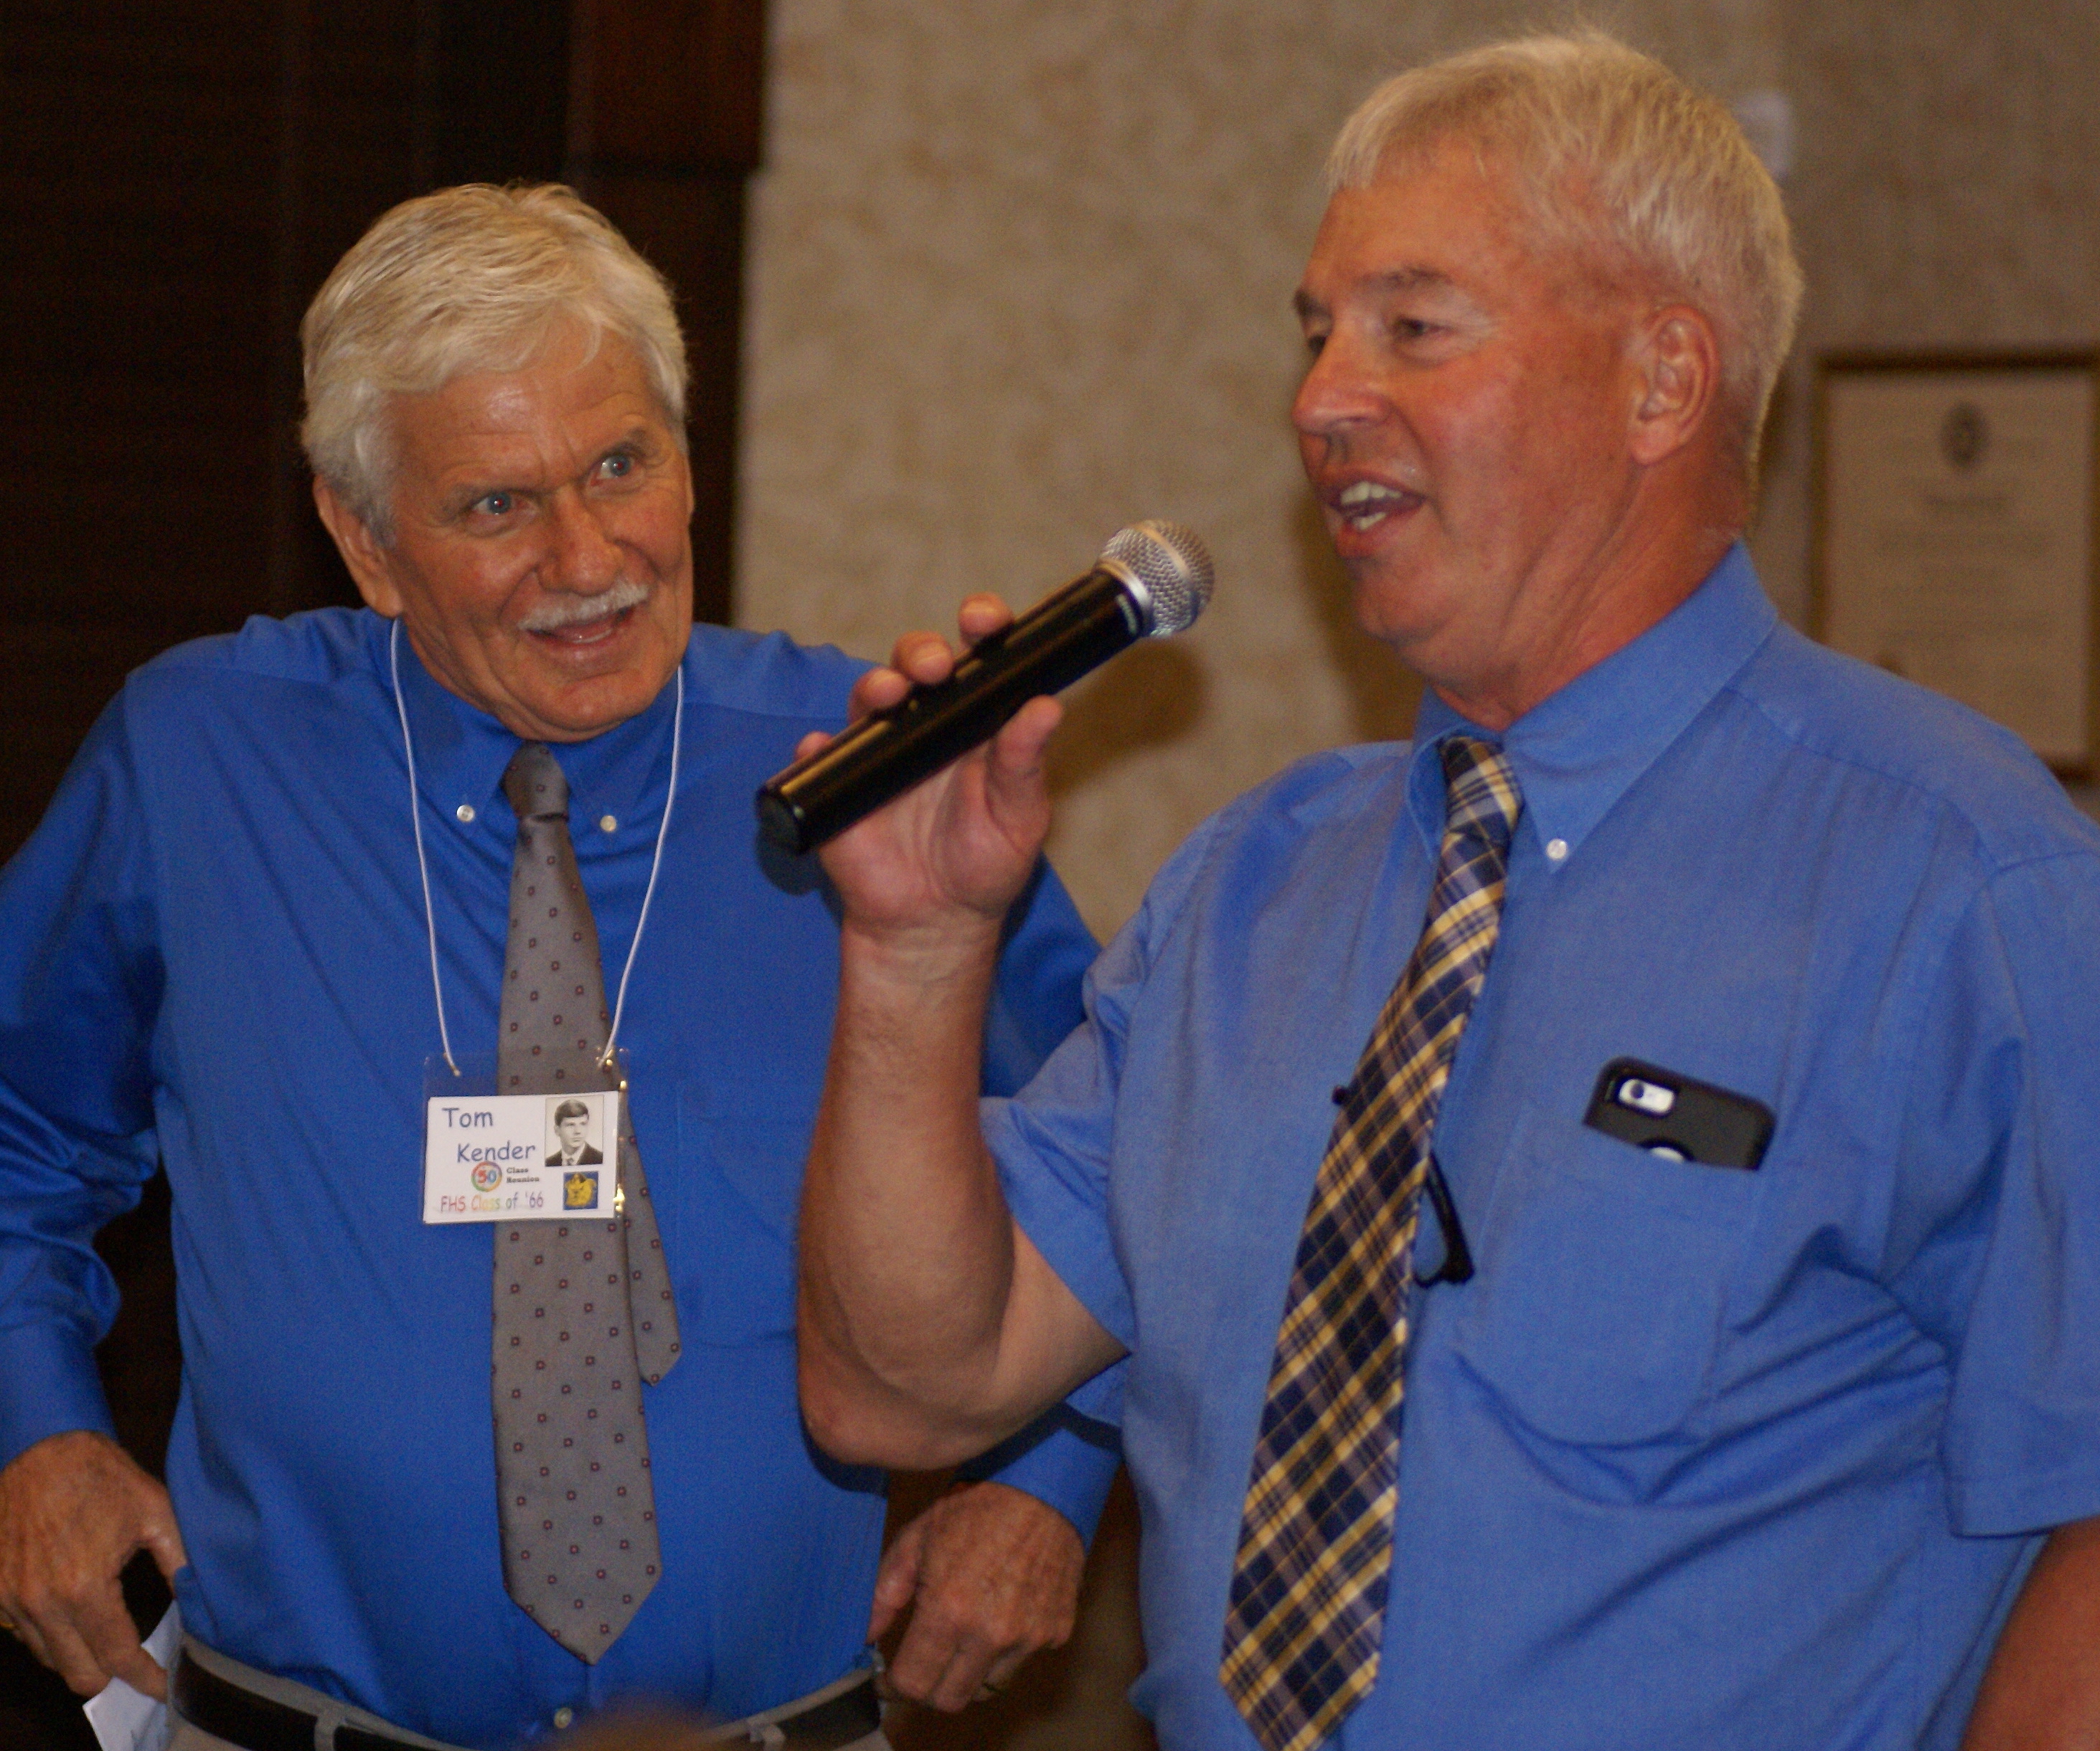 Our creative story tellers, Tom Kender and PJ Shank, make everyone smile!